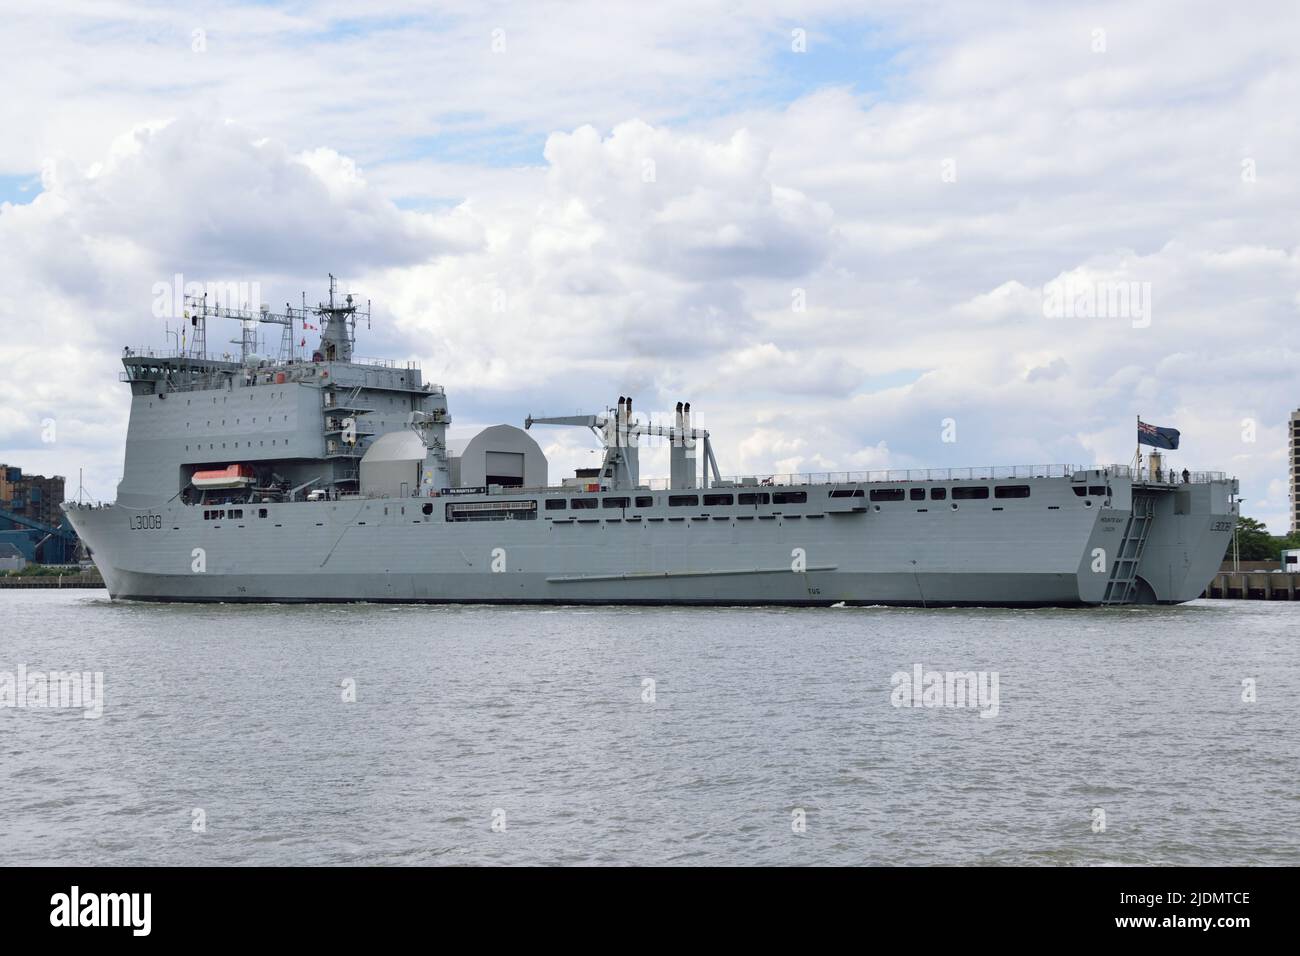 Royal Fleet Auxiliary vessel Mounts Bay heading up the River Thames on a visit to London in support of the Queen's Platinum Jubilee celebrations Stock Photo